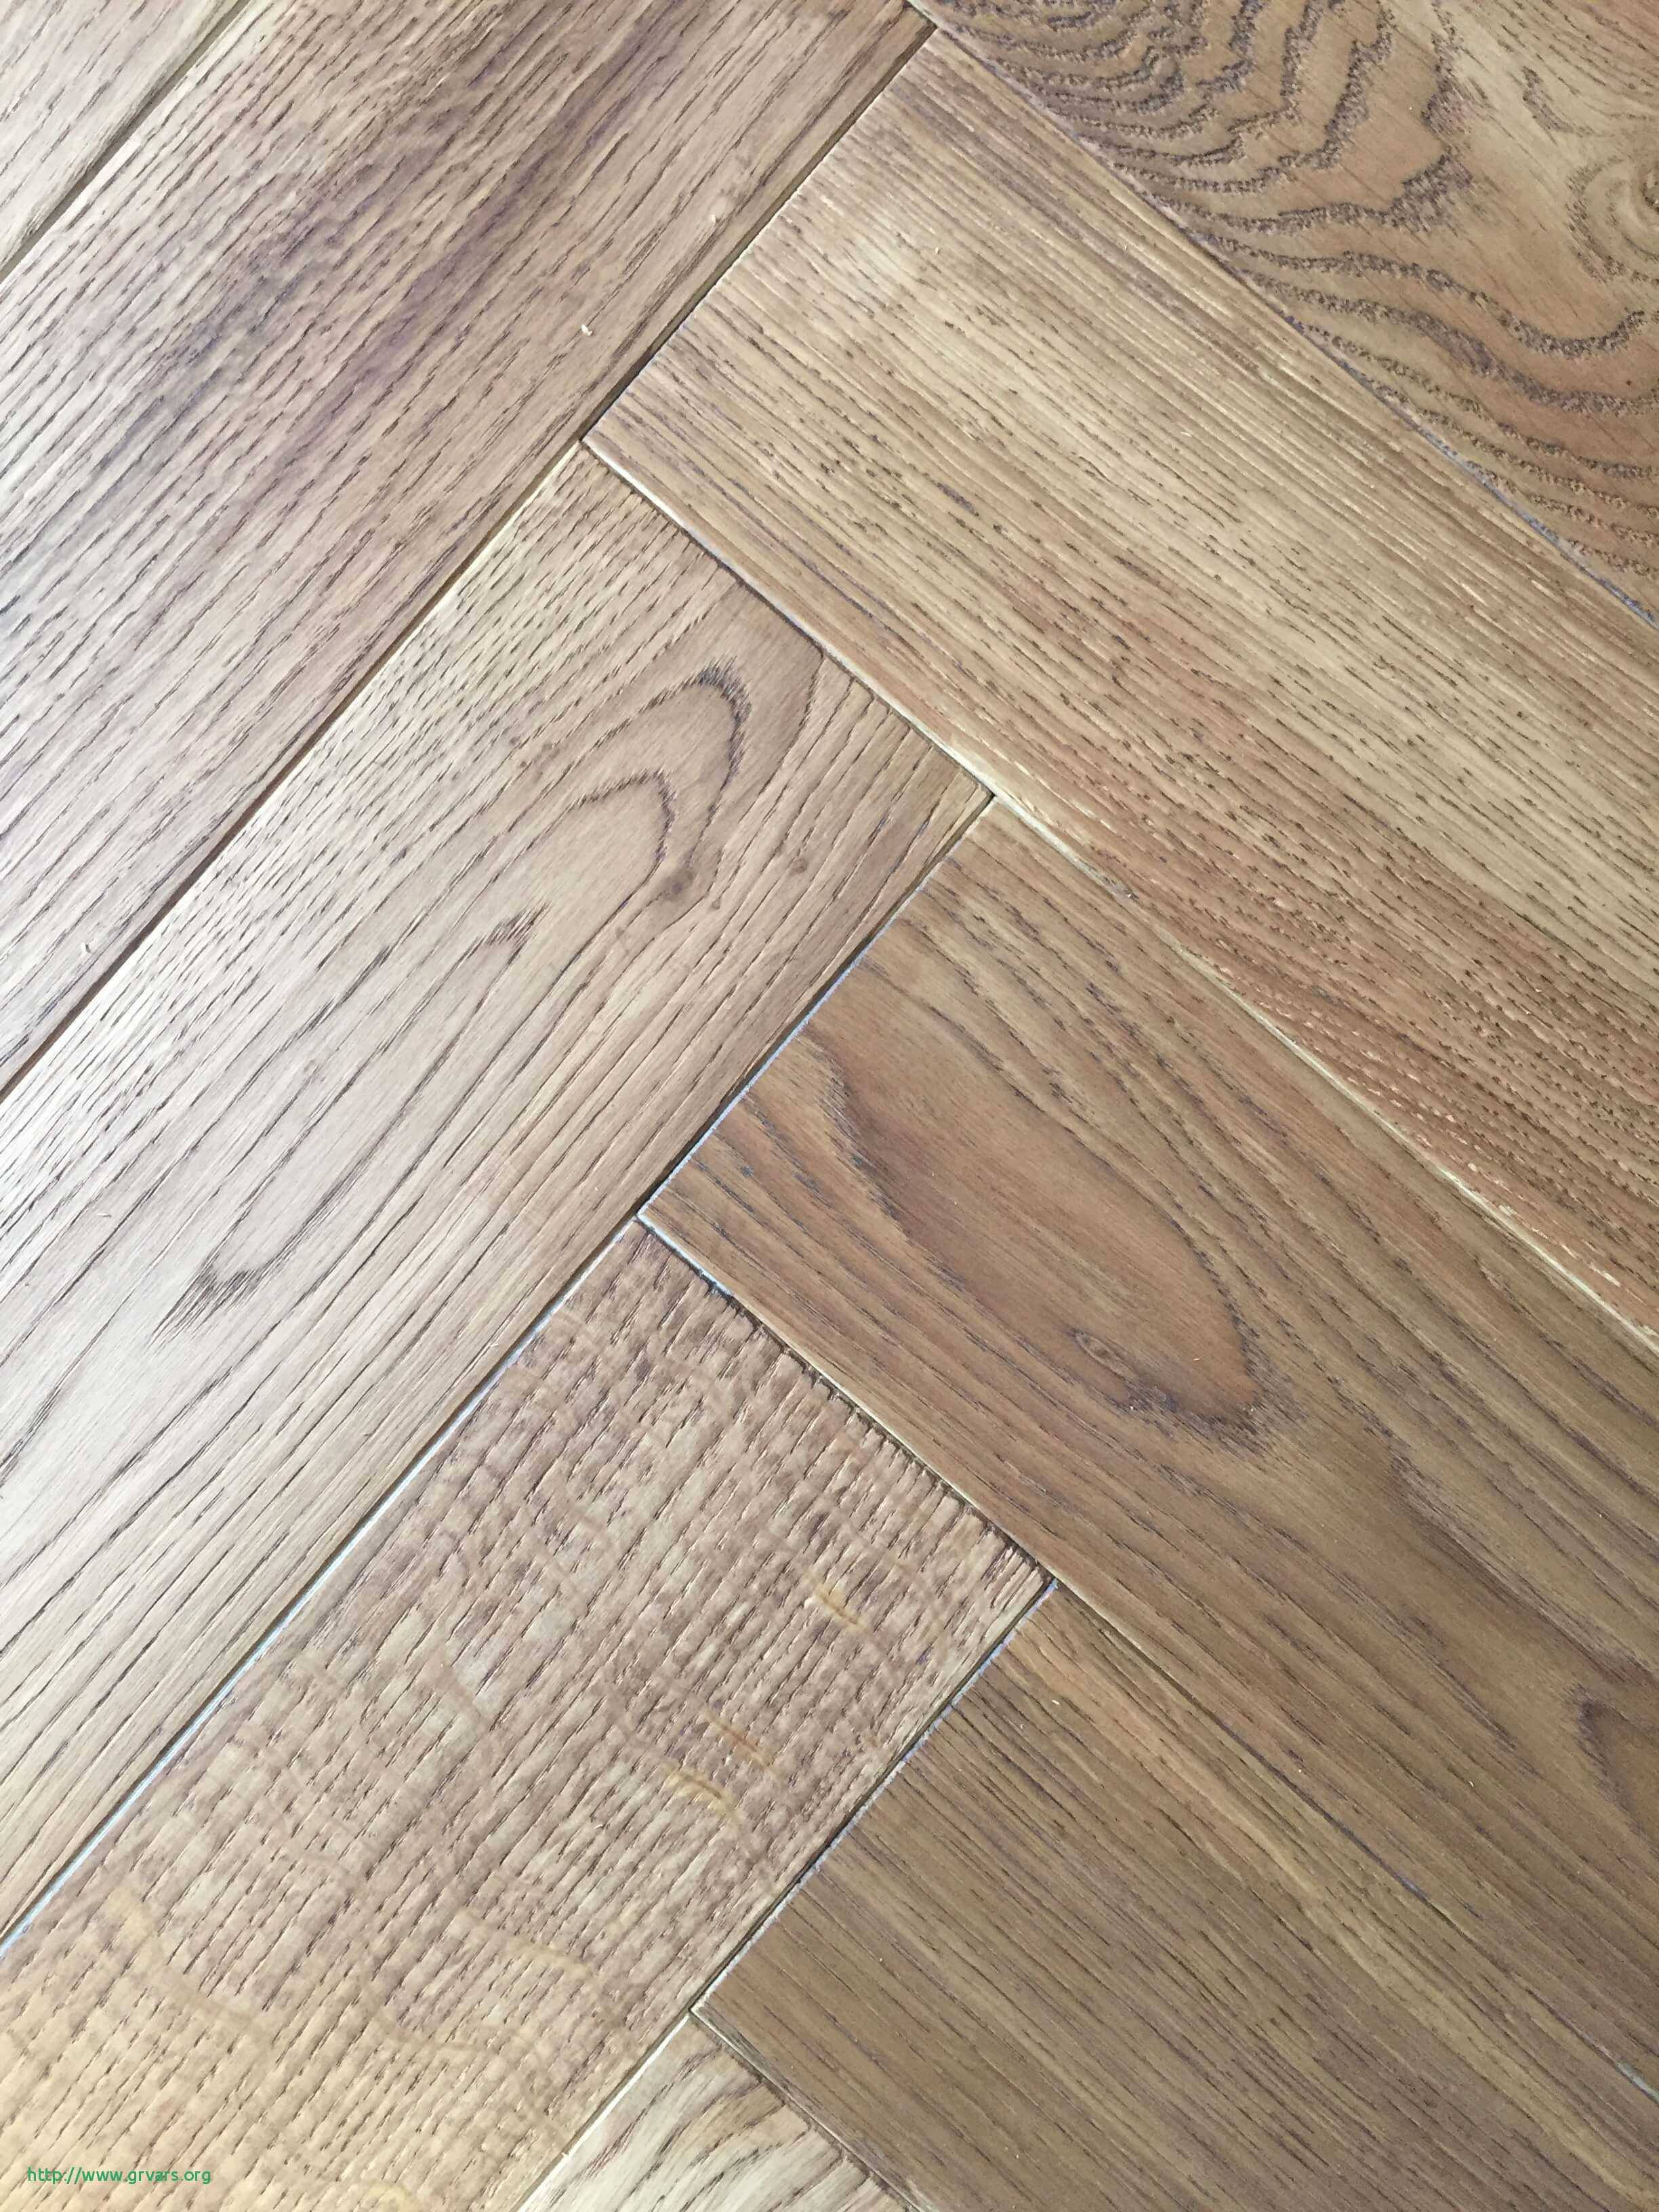 hardwood flooring barrie on of 10 discontinued hardwood flooring for sale on a budget best throughout discontinued hardwood flooring for sale ideas